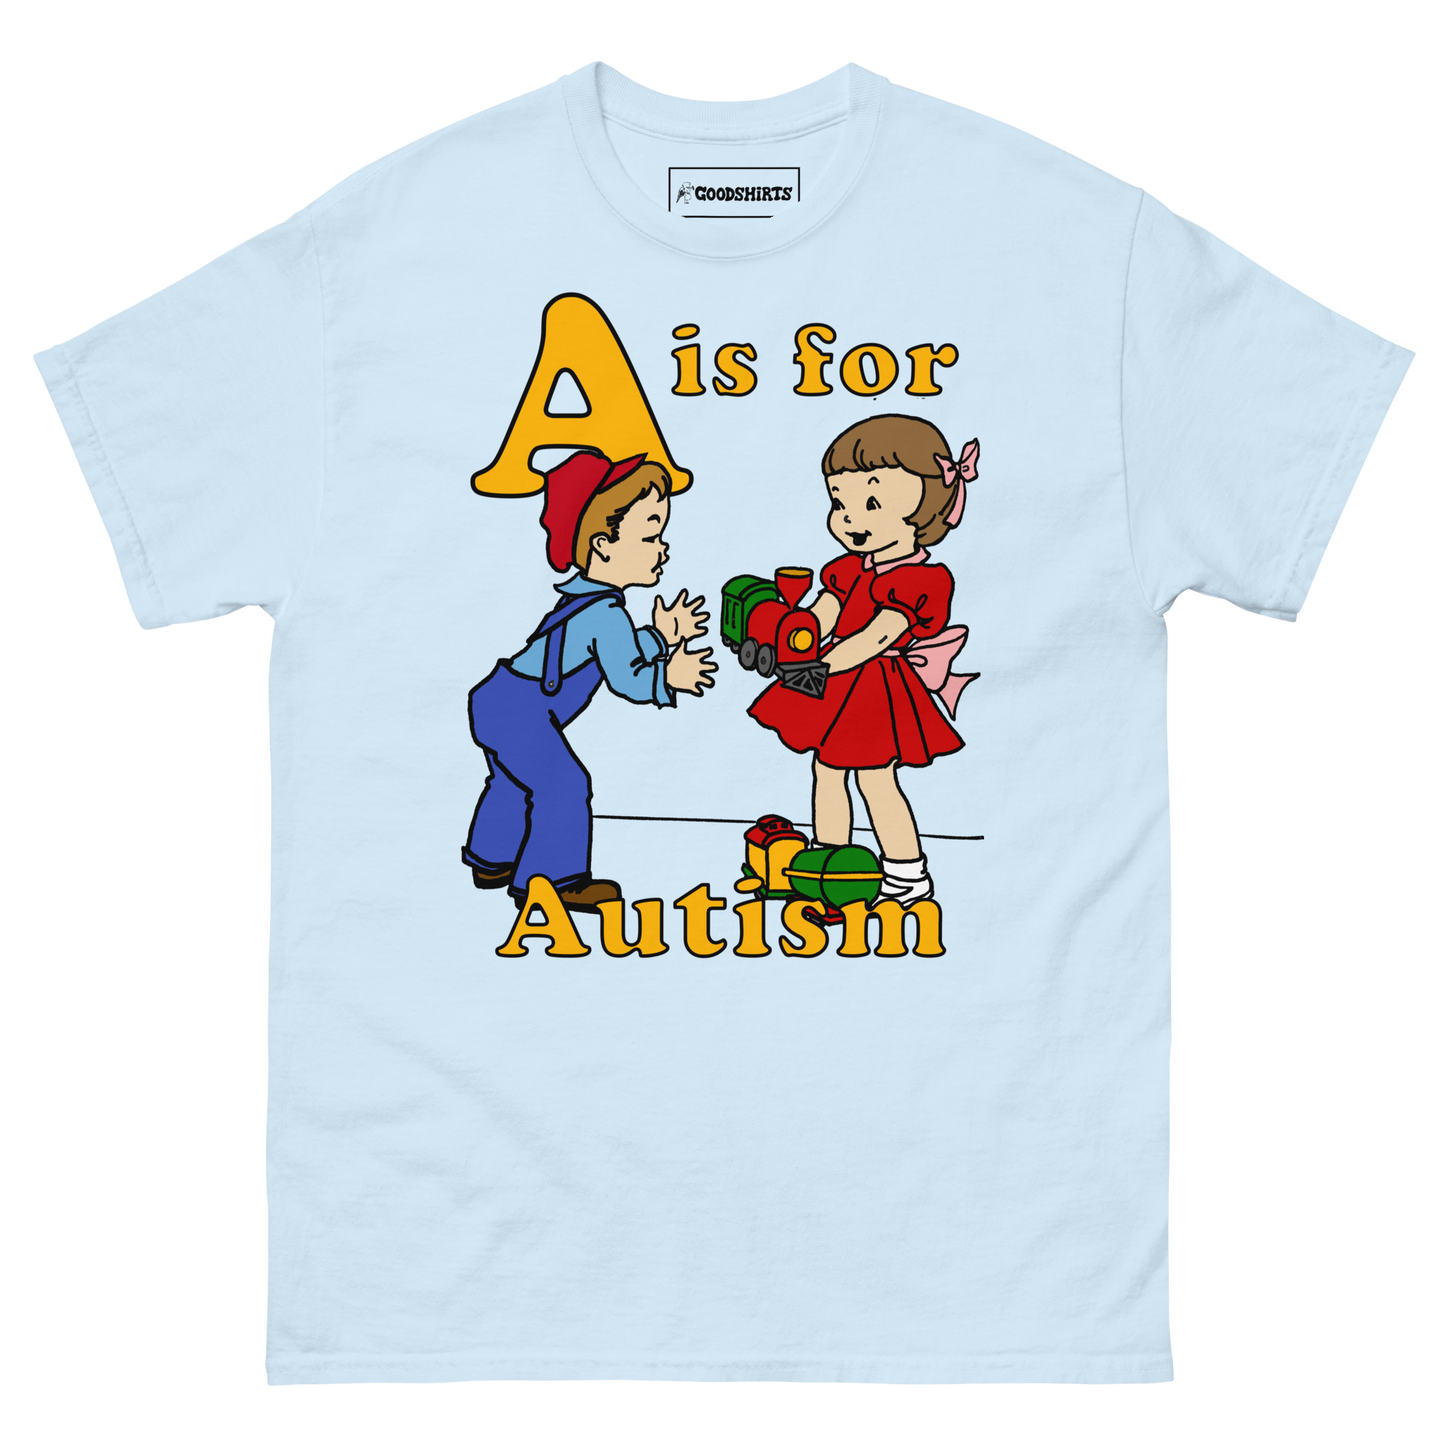 A Is For Autism.